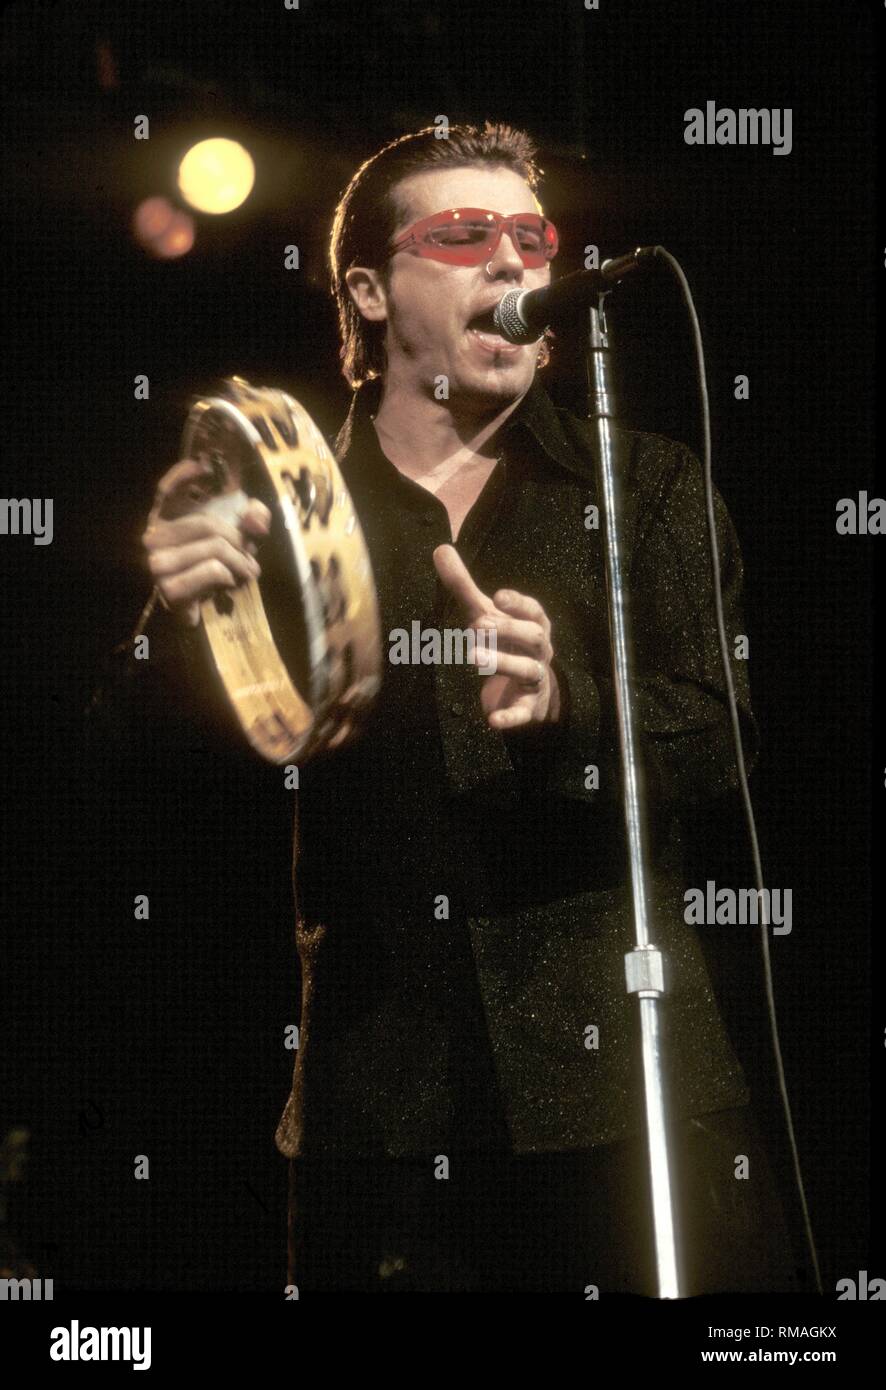 Frontman Ian Astbury of the Holy Barbarians is shown performing on stage during a concert appearance. Stock Photo